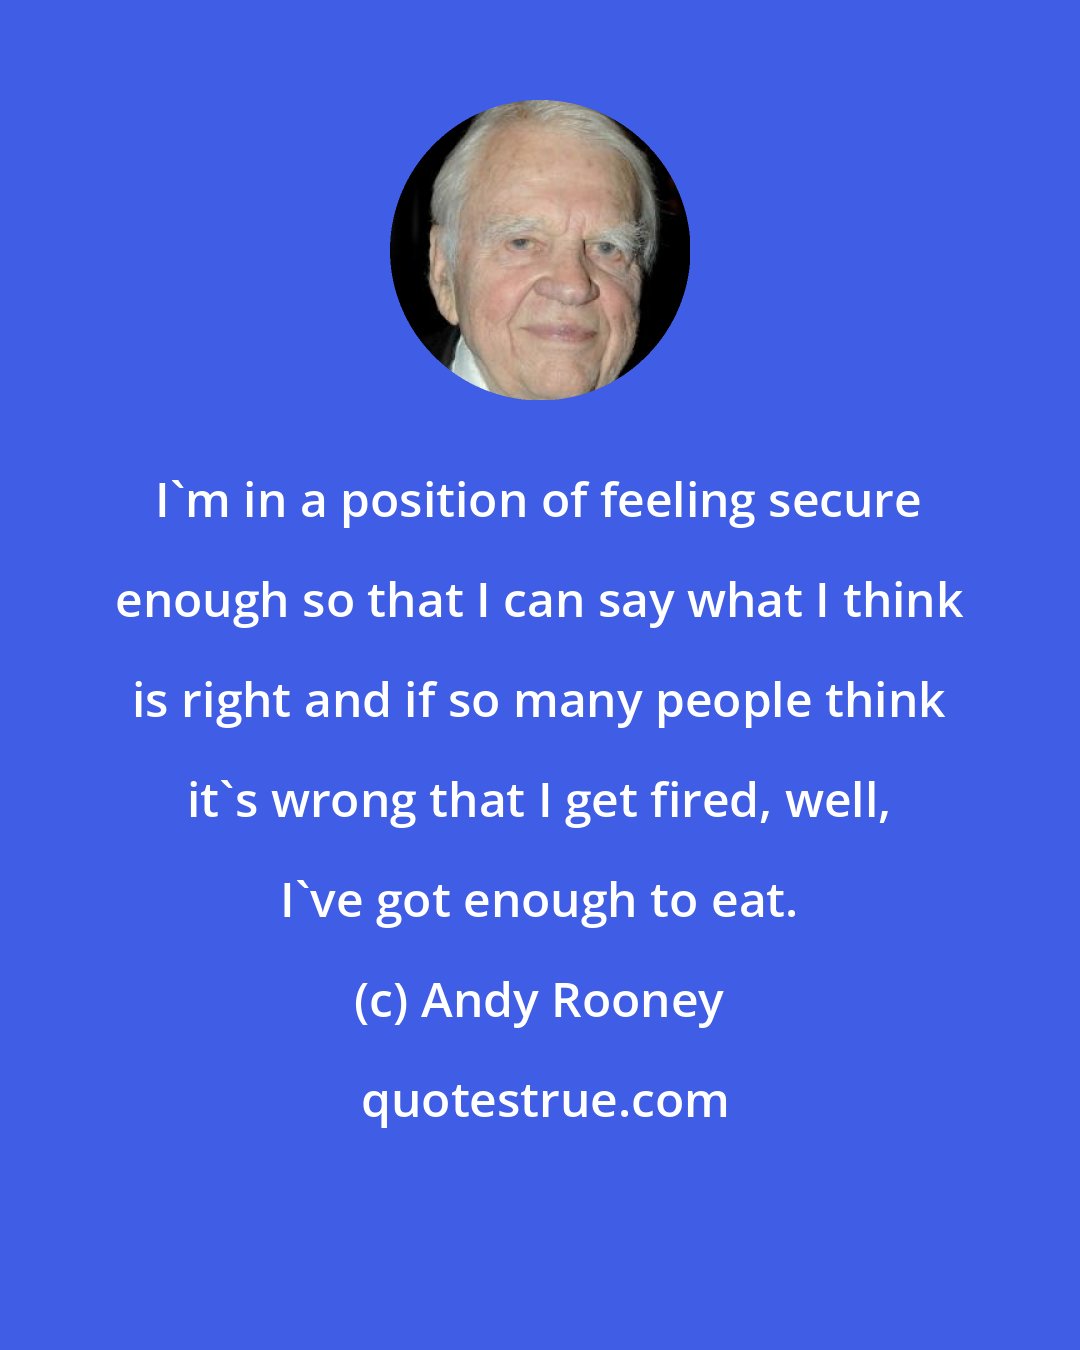 Andy Rooney: I'm in a position of feeling secure enough so that I can say what I think is right and if so many people think it's wrong that I get fired, well, I've got enough to eat.